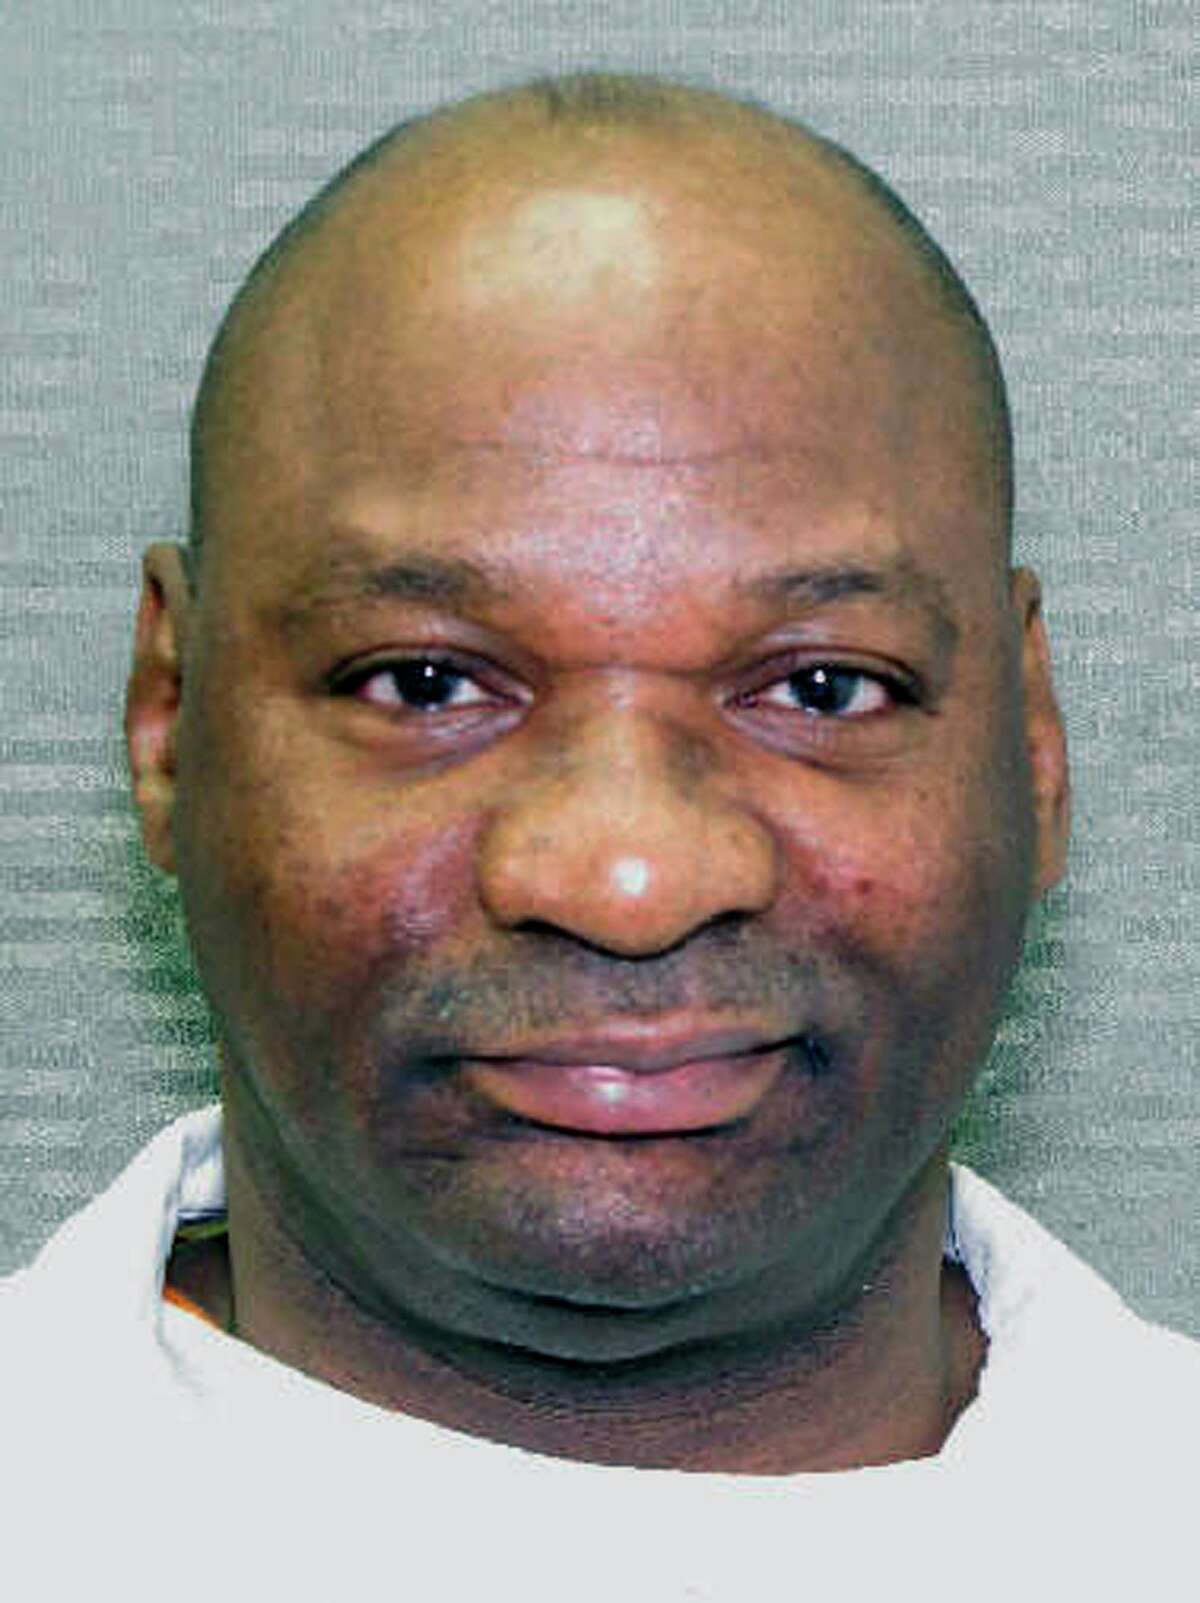 FILE - This undated file photo provided by the Texas Department of Criminal Justice shows death-row inmate Bobby James Moore. Texas' attorney general is pushing to keep Moore on death row despite prosecutors and defense lawyers agreeing that the man is intellectually disabled and shouldn't be executed. The Houston Chronicle reports that the state attorney general's office asked to take over death row inmate Bobby James Moore's case on Wednesday, Nov. 7, 2018. (Texas Department of Criminal Justice via AP)